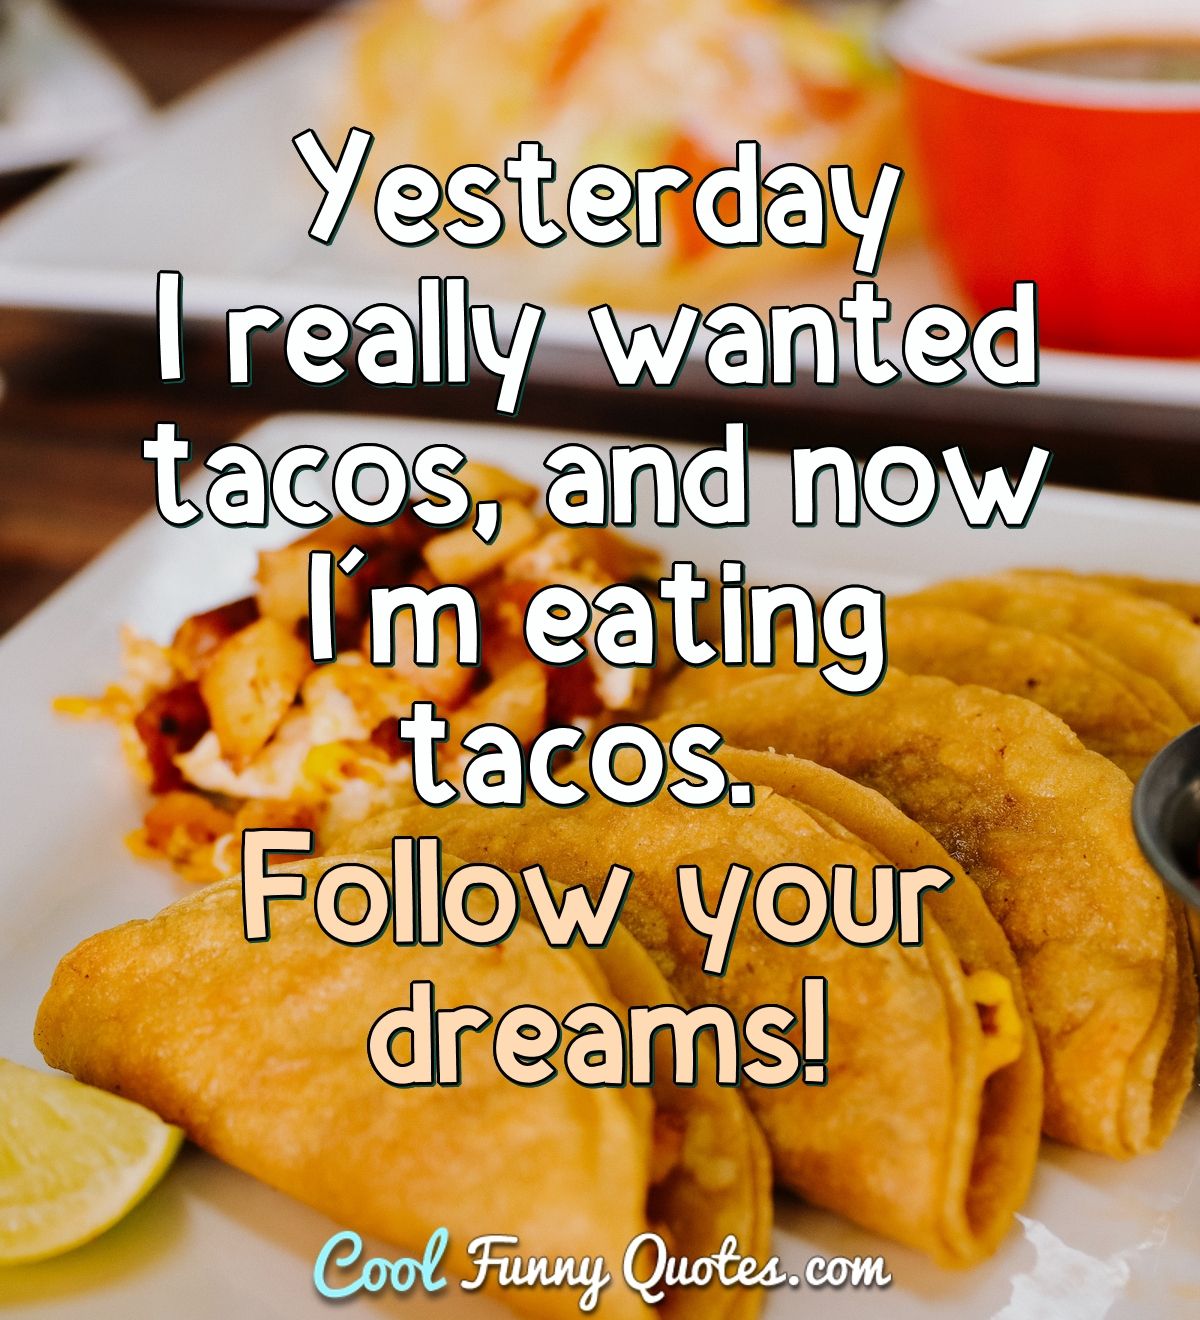 Yesterday I really wanted tacos, and now I'm eating tacos. Follow your dreams! - Anonymous